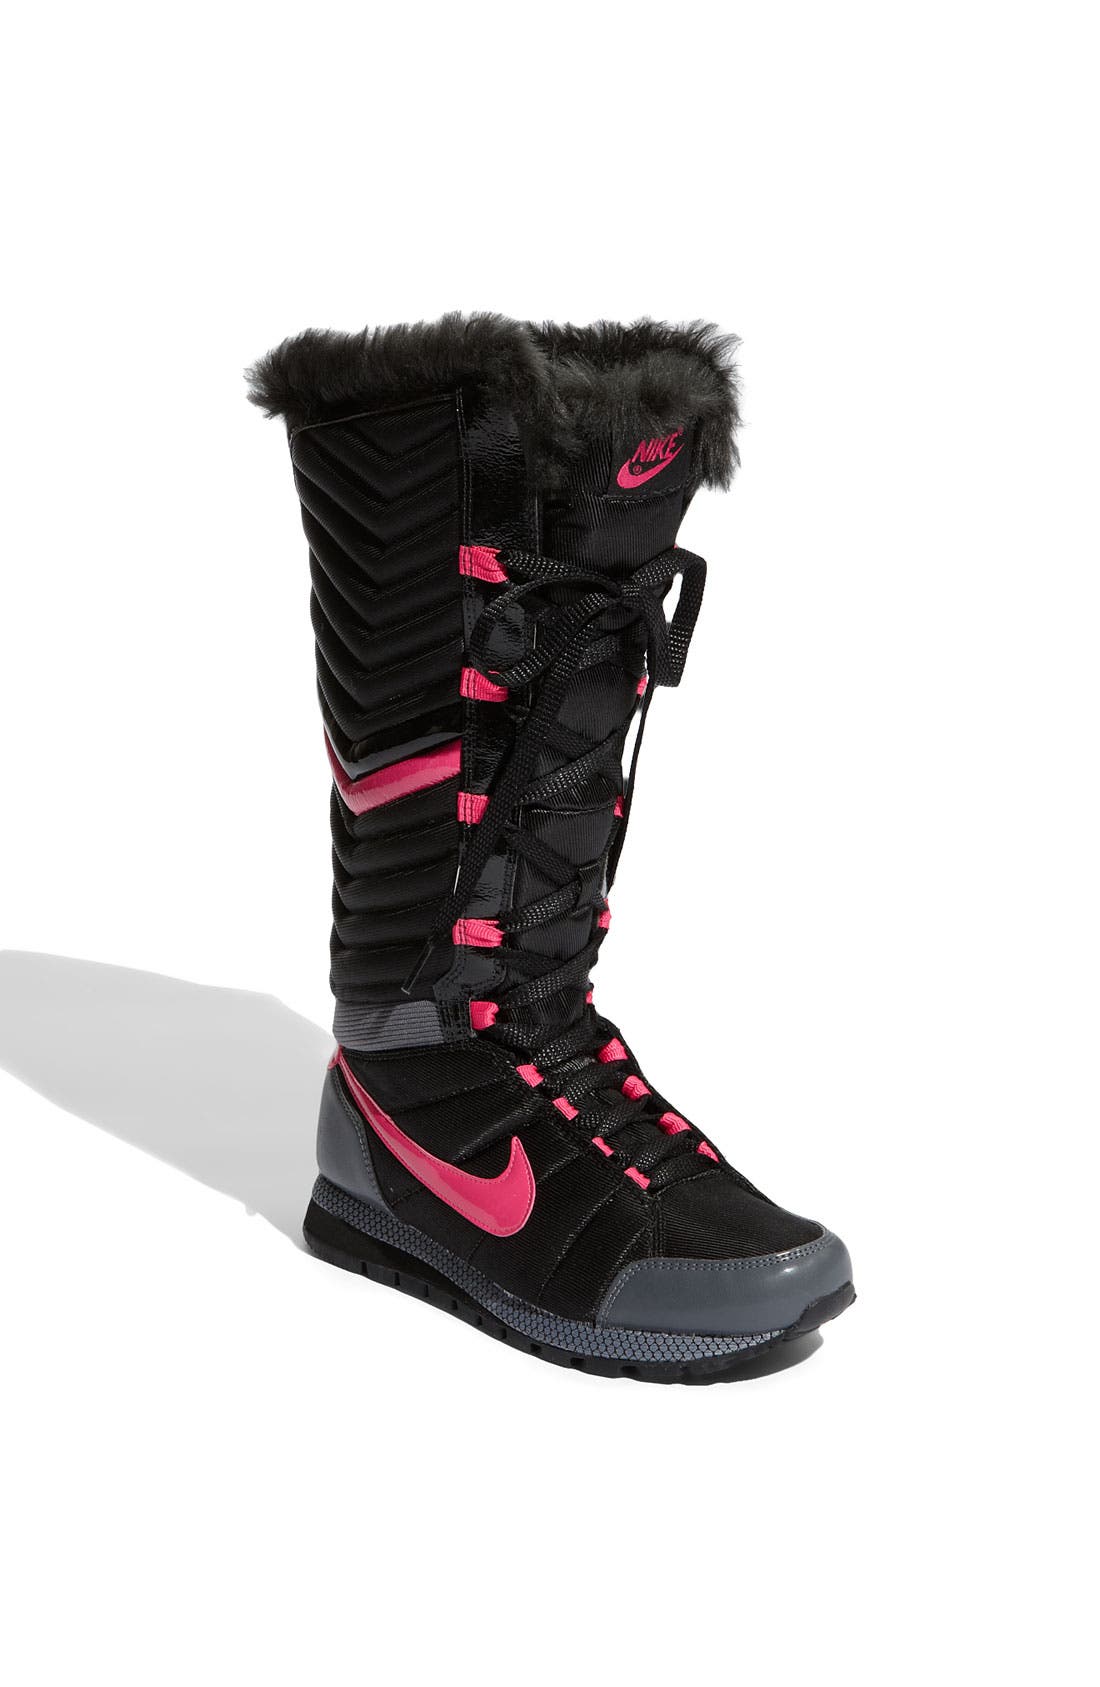 nike boots snow